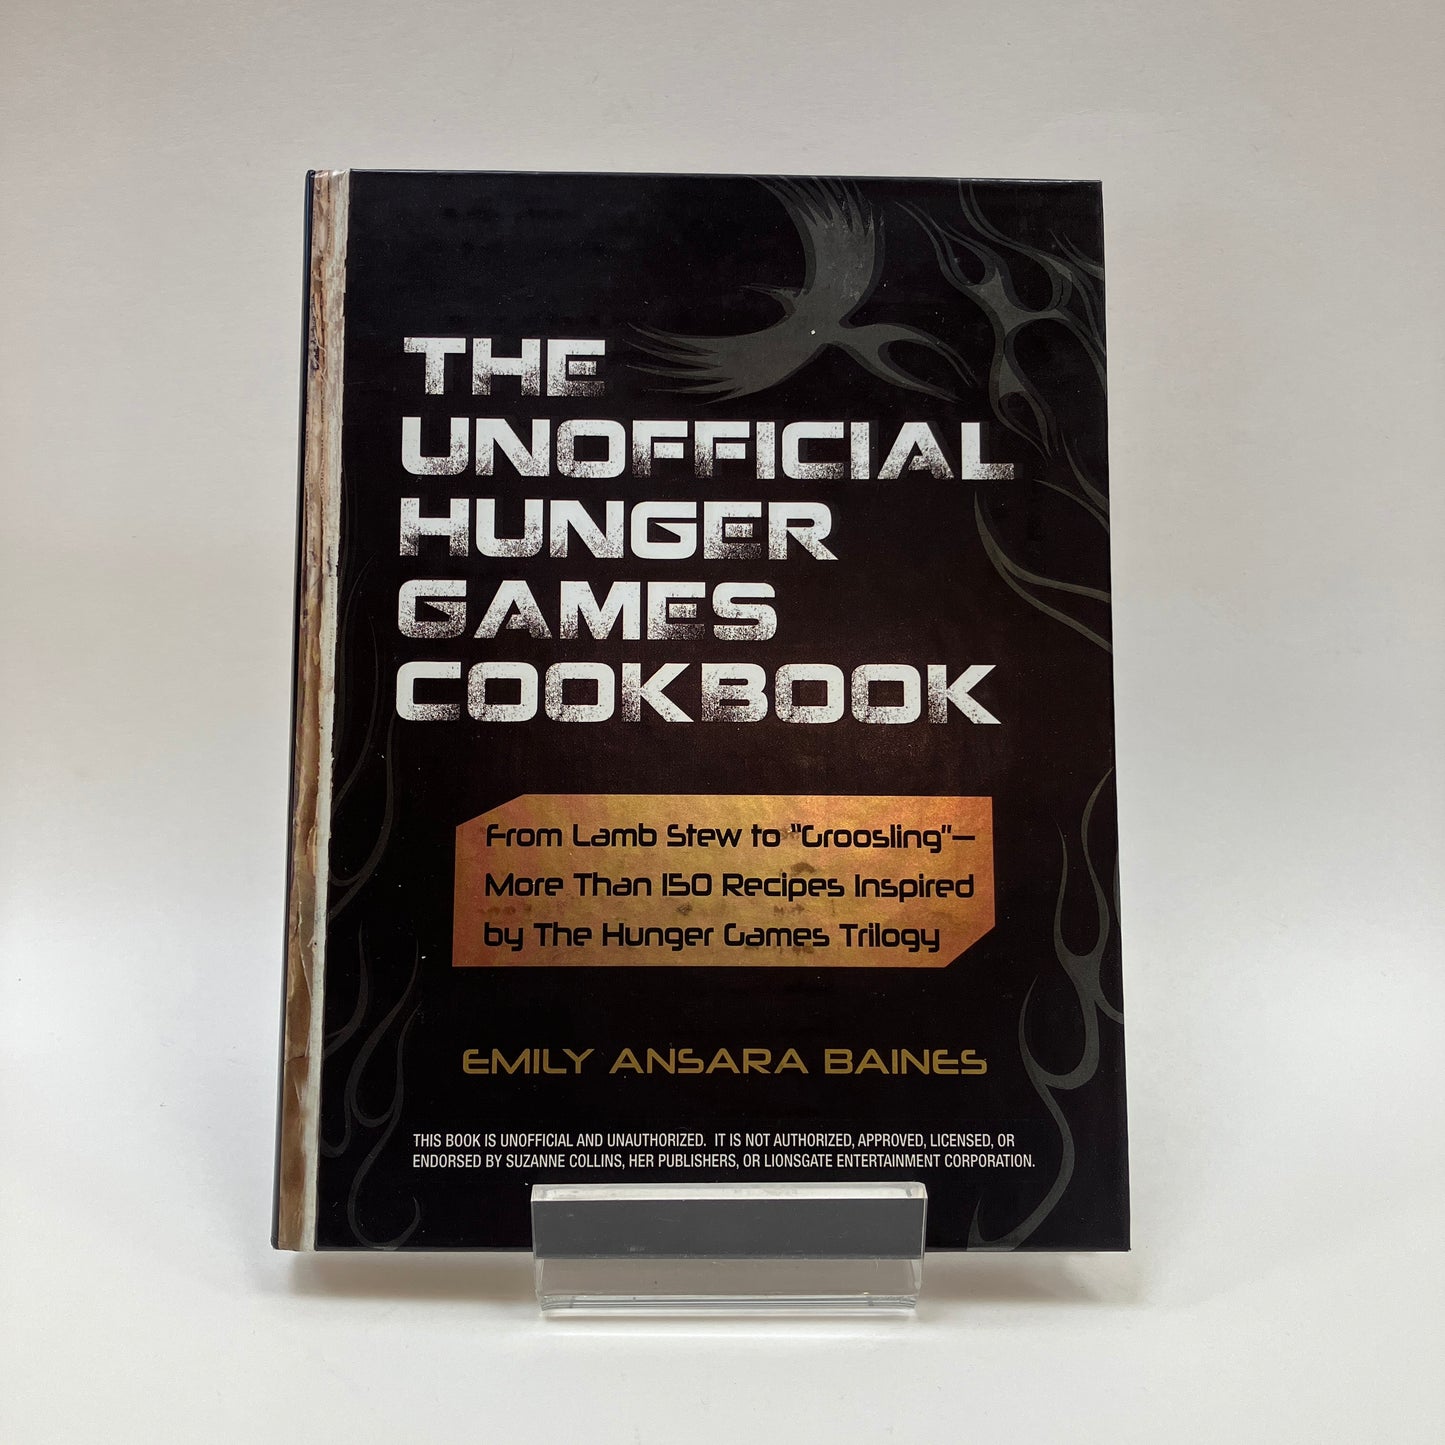 The Unofficial Hunger Games Cook Book, Emily Ansara Baines, 2011